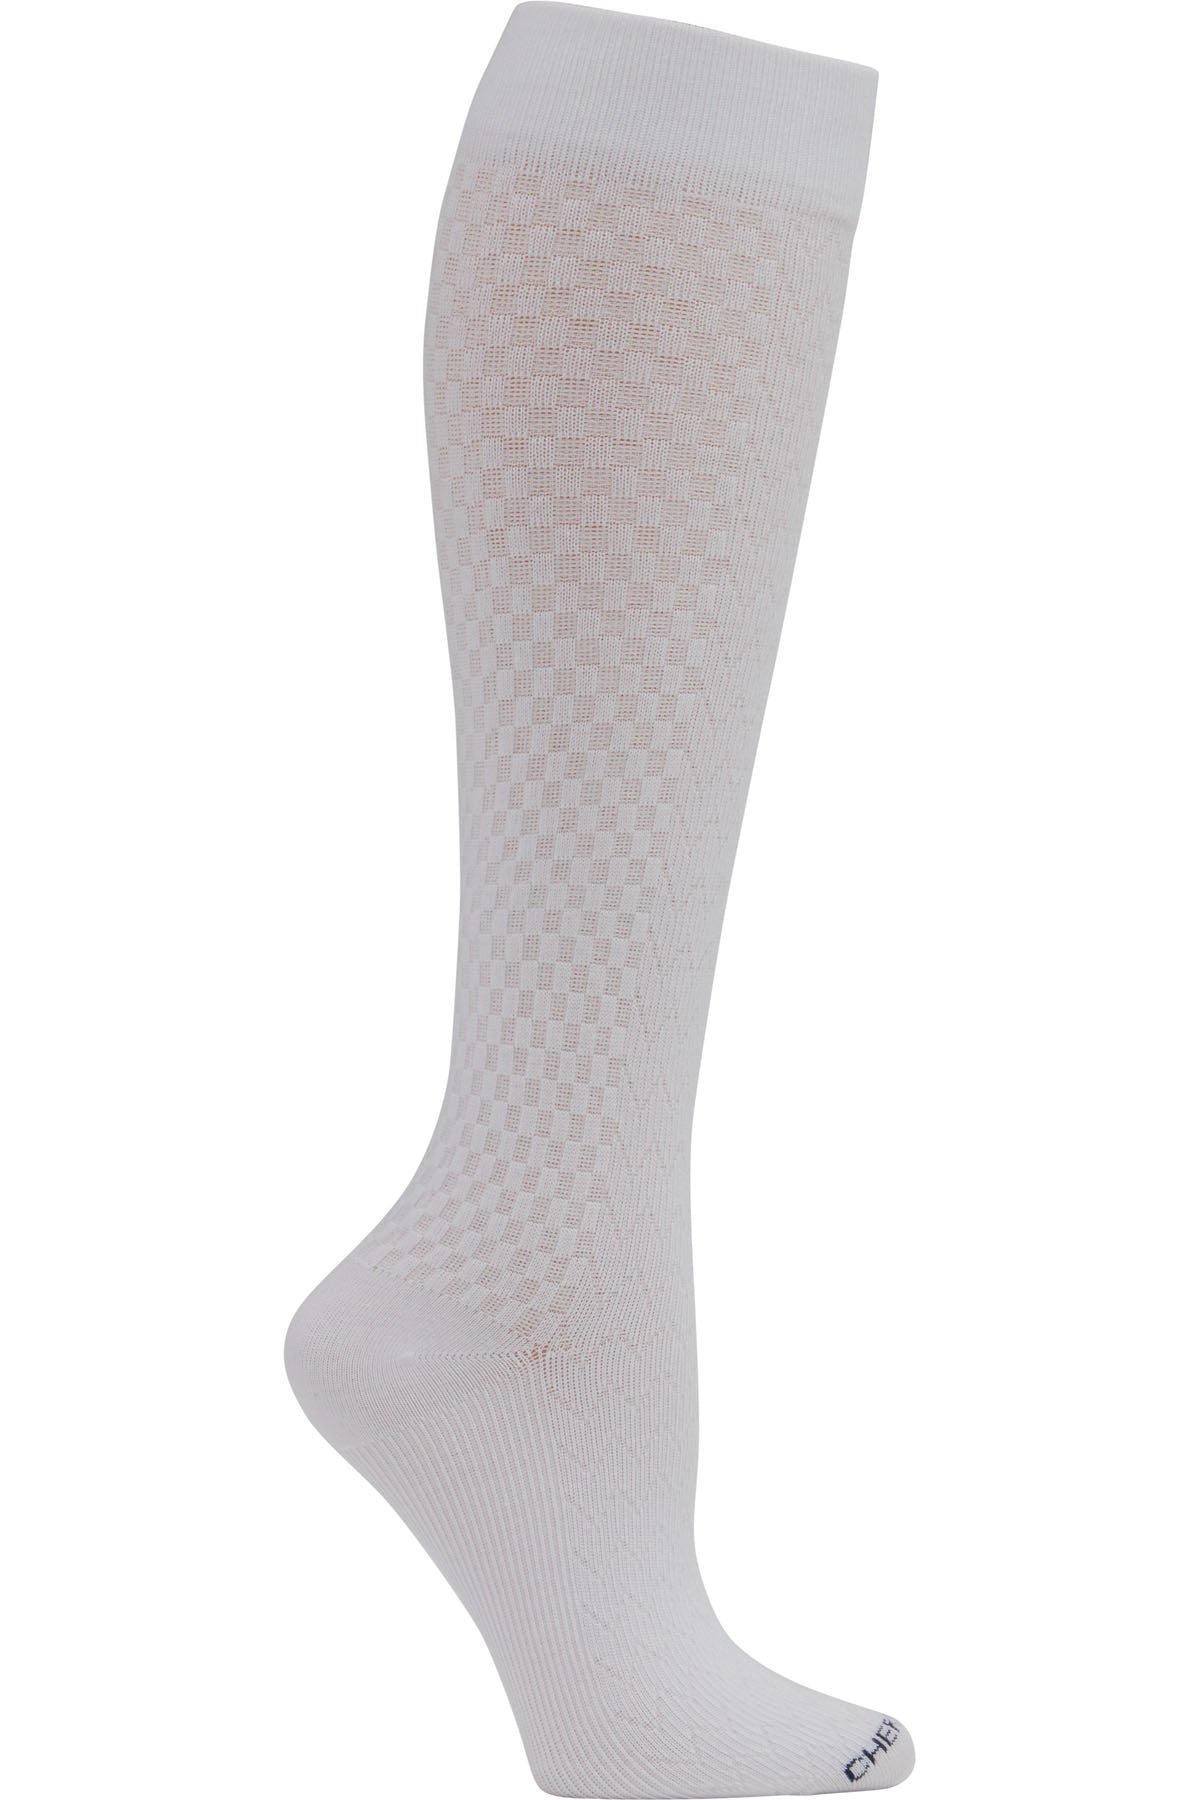 Cherokee Plus Size Mild Compression Extra Wide Calf Socks True Support 10-15 mmHg in White at Parker's Clothing and Shoes.